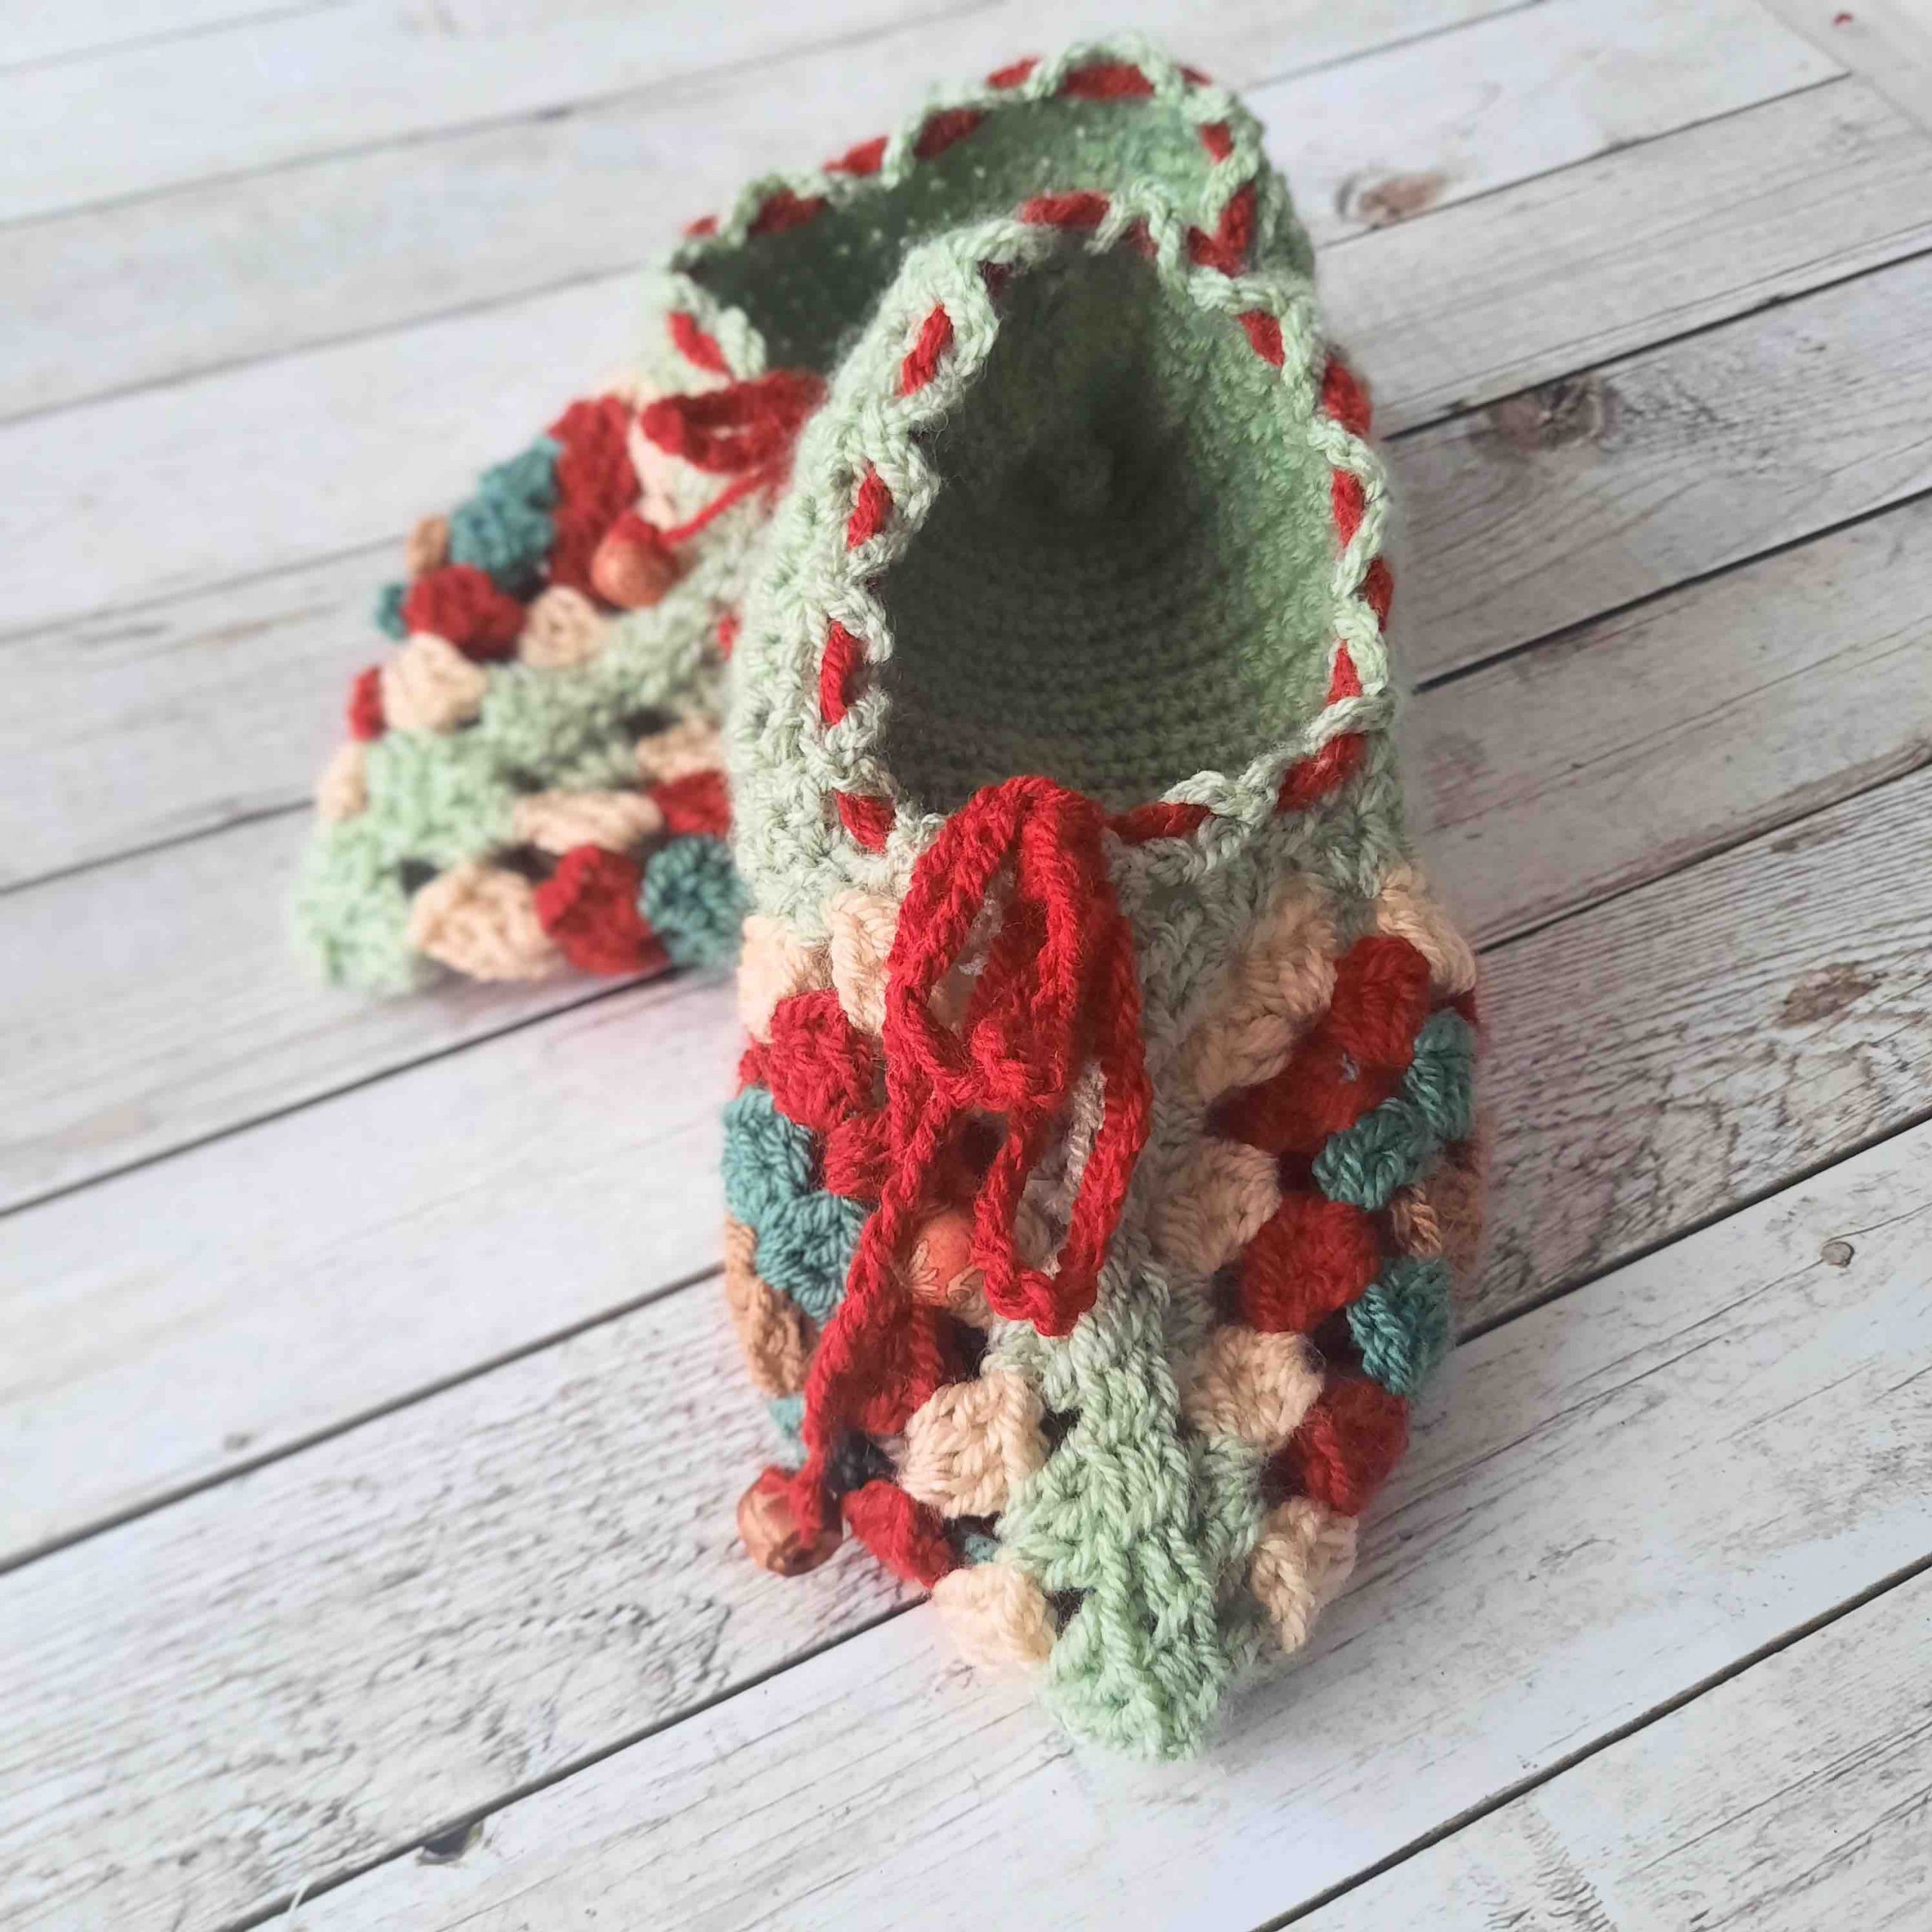 How to crochet granny slippers Triangle